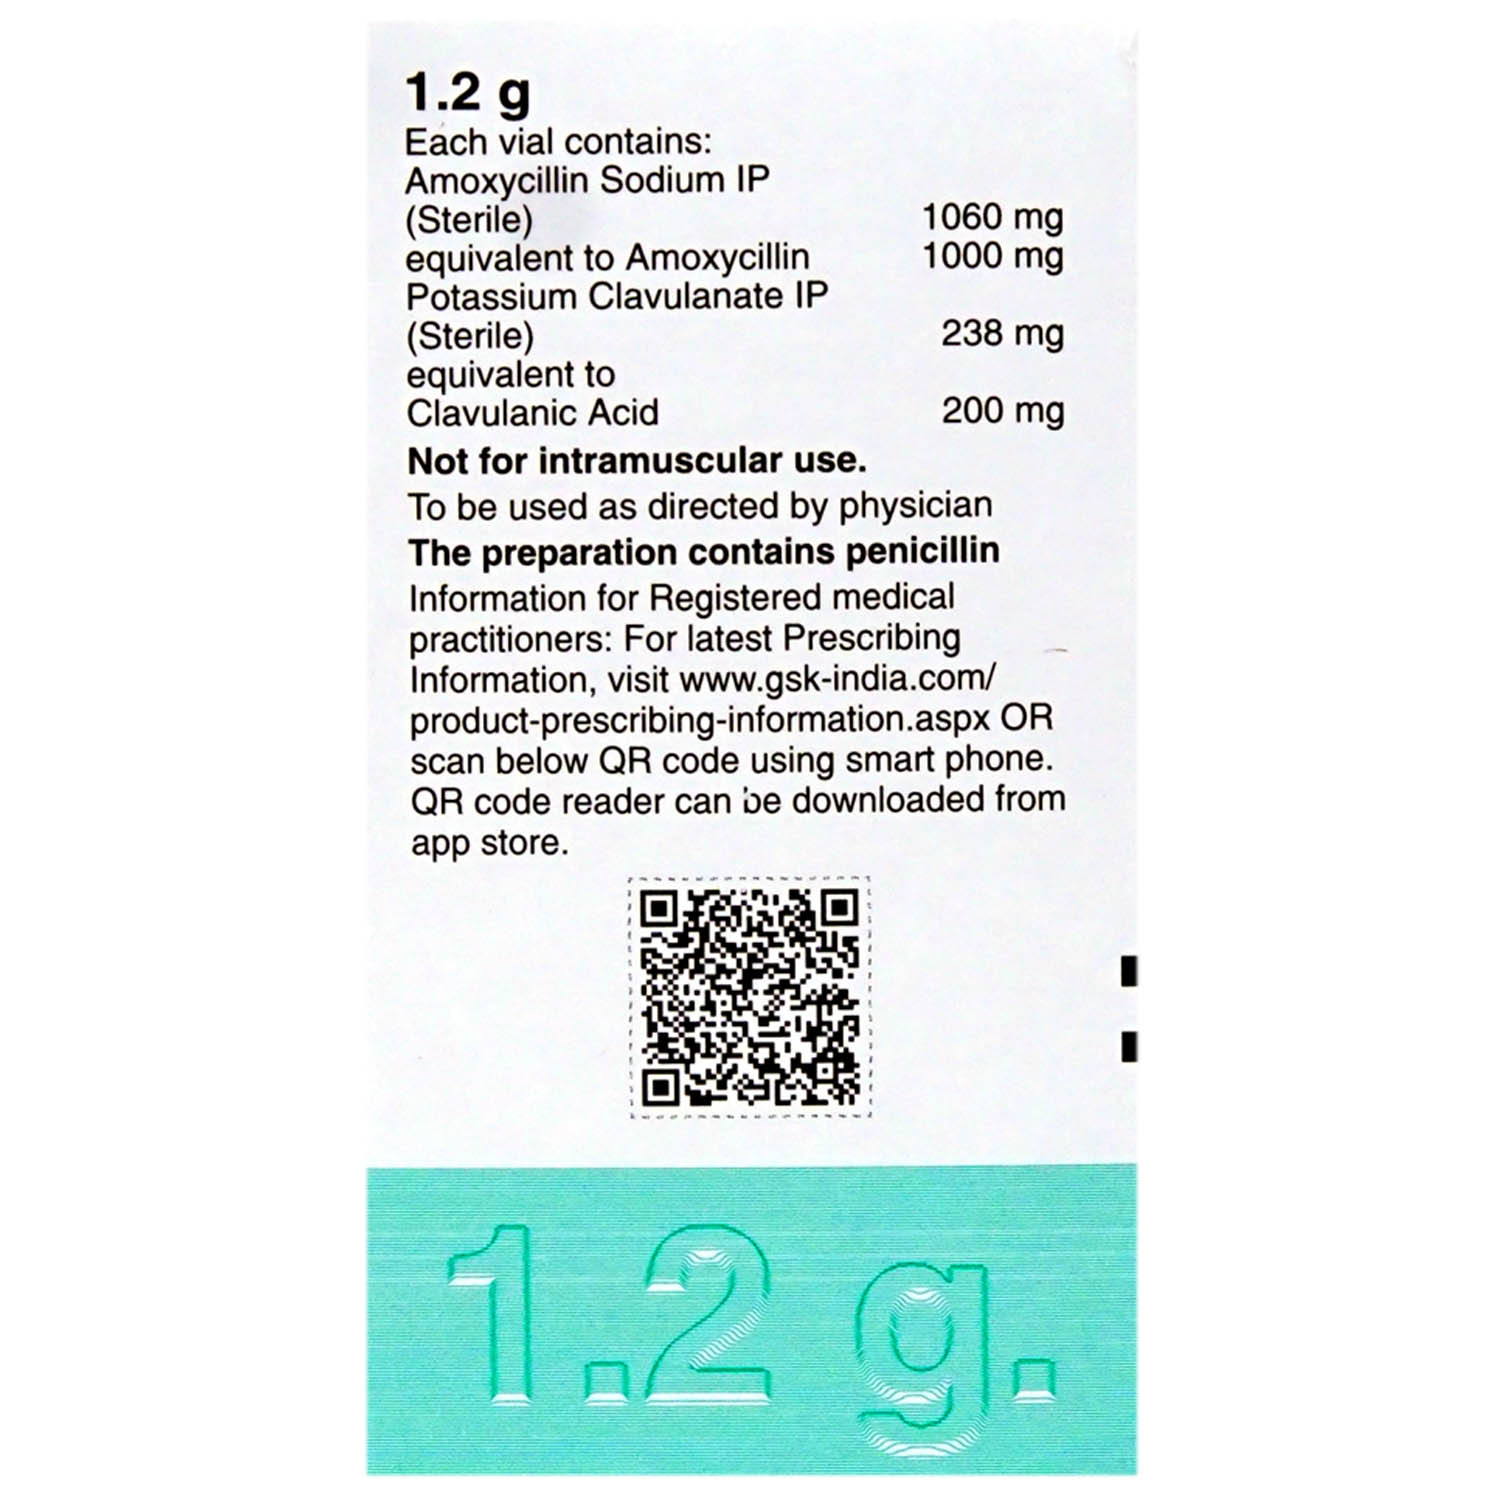 Augmentin 1.2 gm Injection 1's, Pack of 1 INJECTION